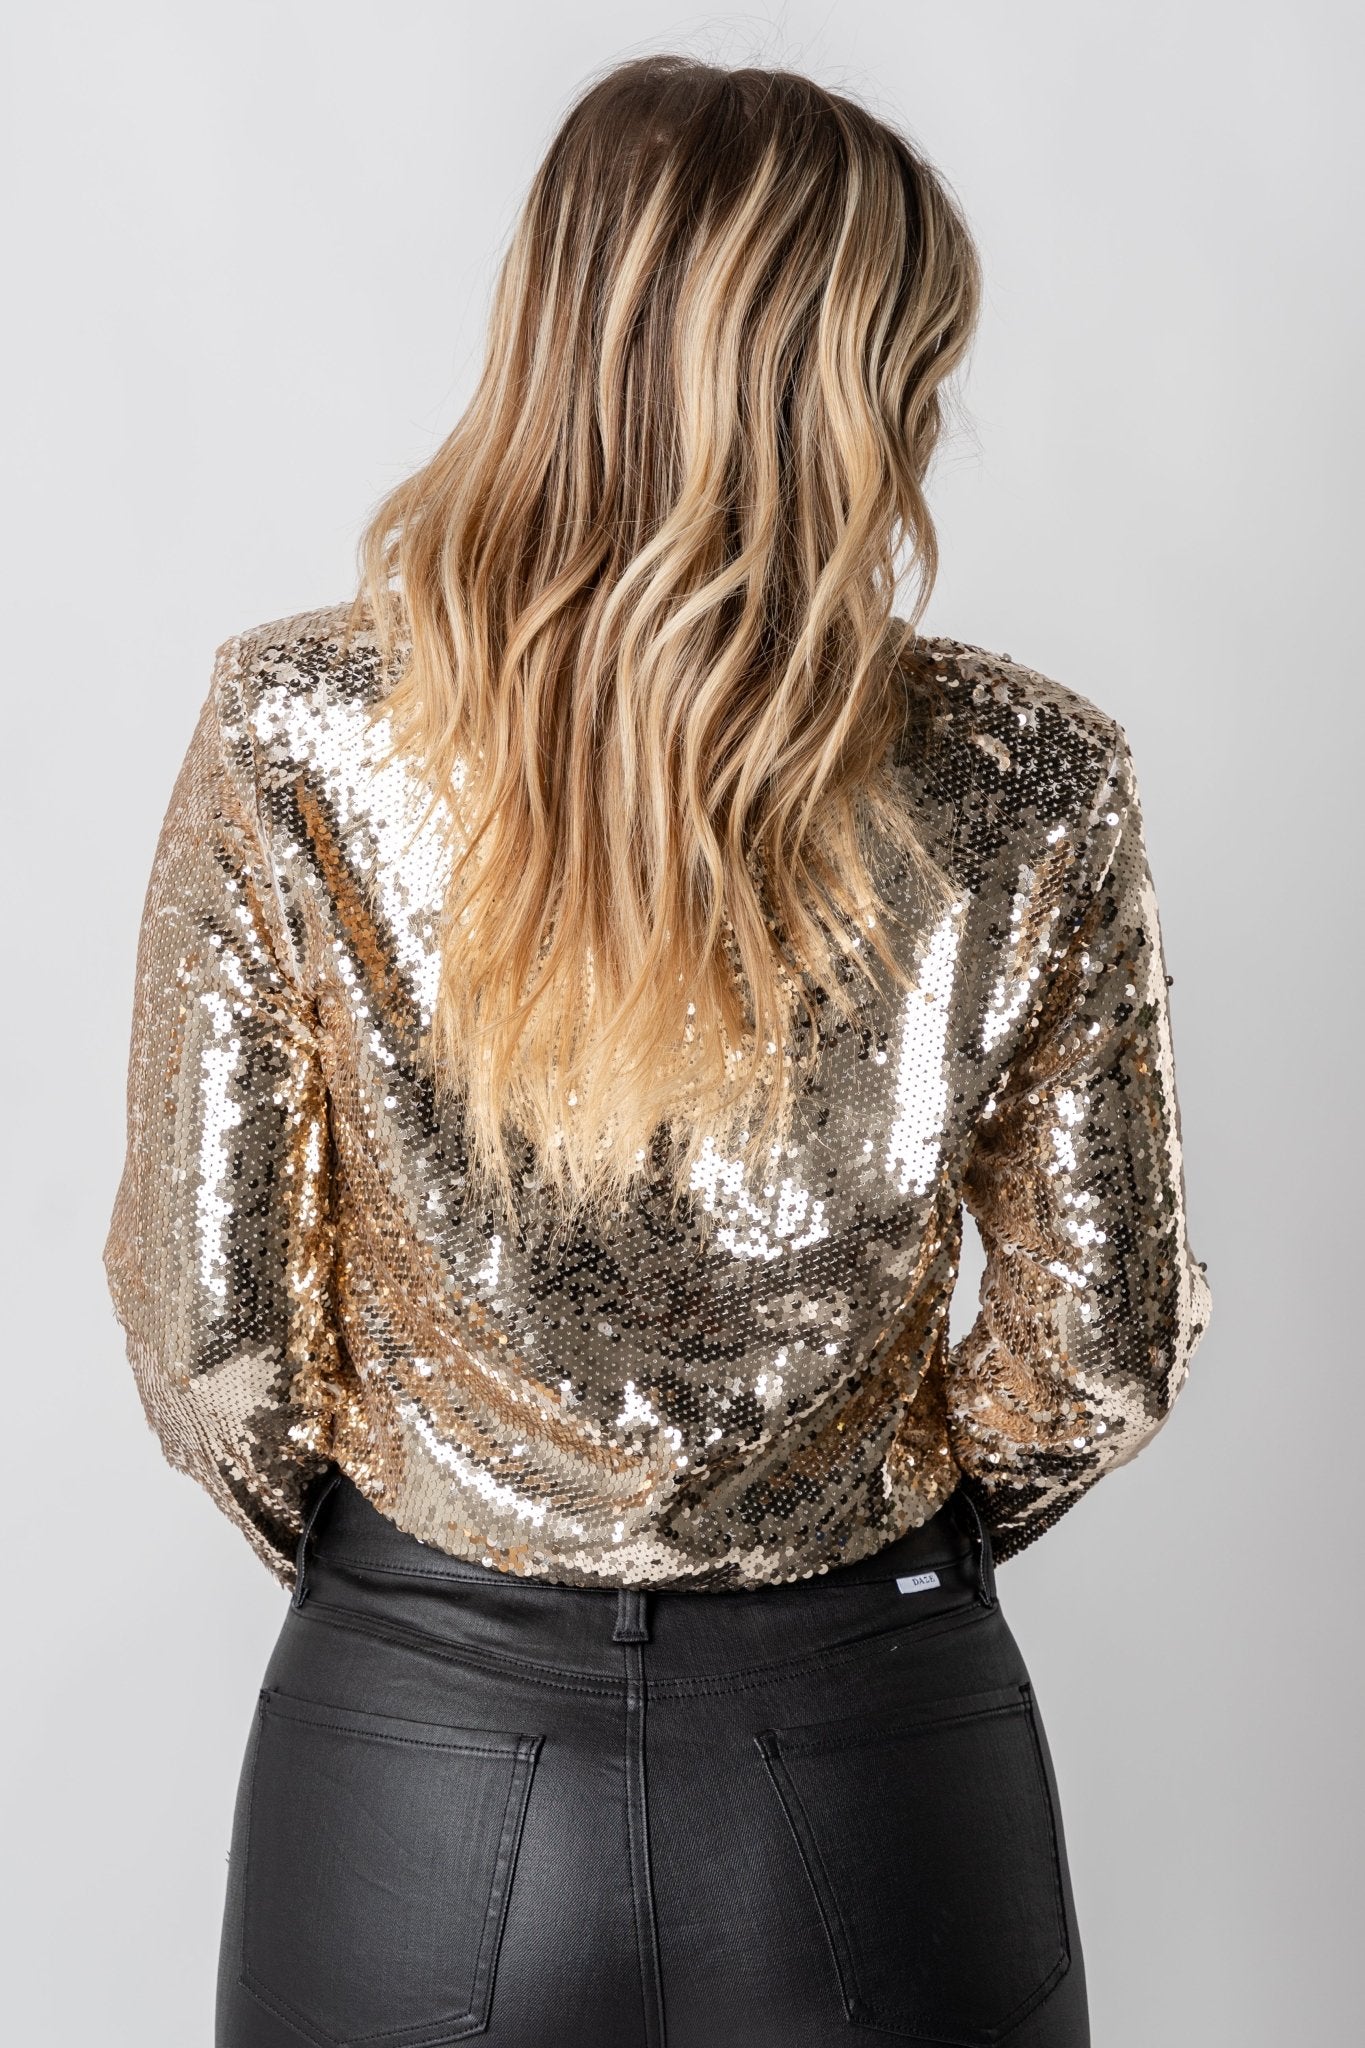 Sequin jacket w/ shoulder pads champagne – Unique Blazers | Cute Blazers For Women at Lush Fashion Lounge Boutique in Oklahoma City